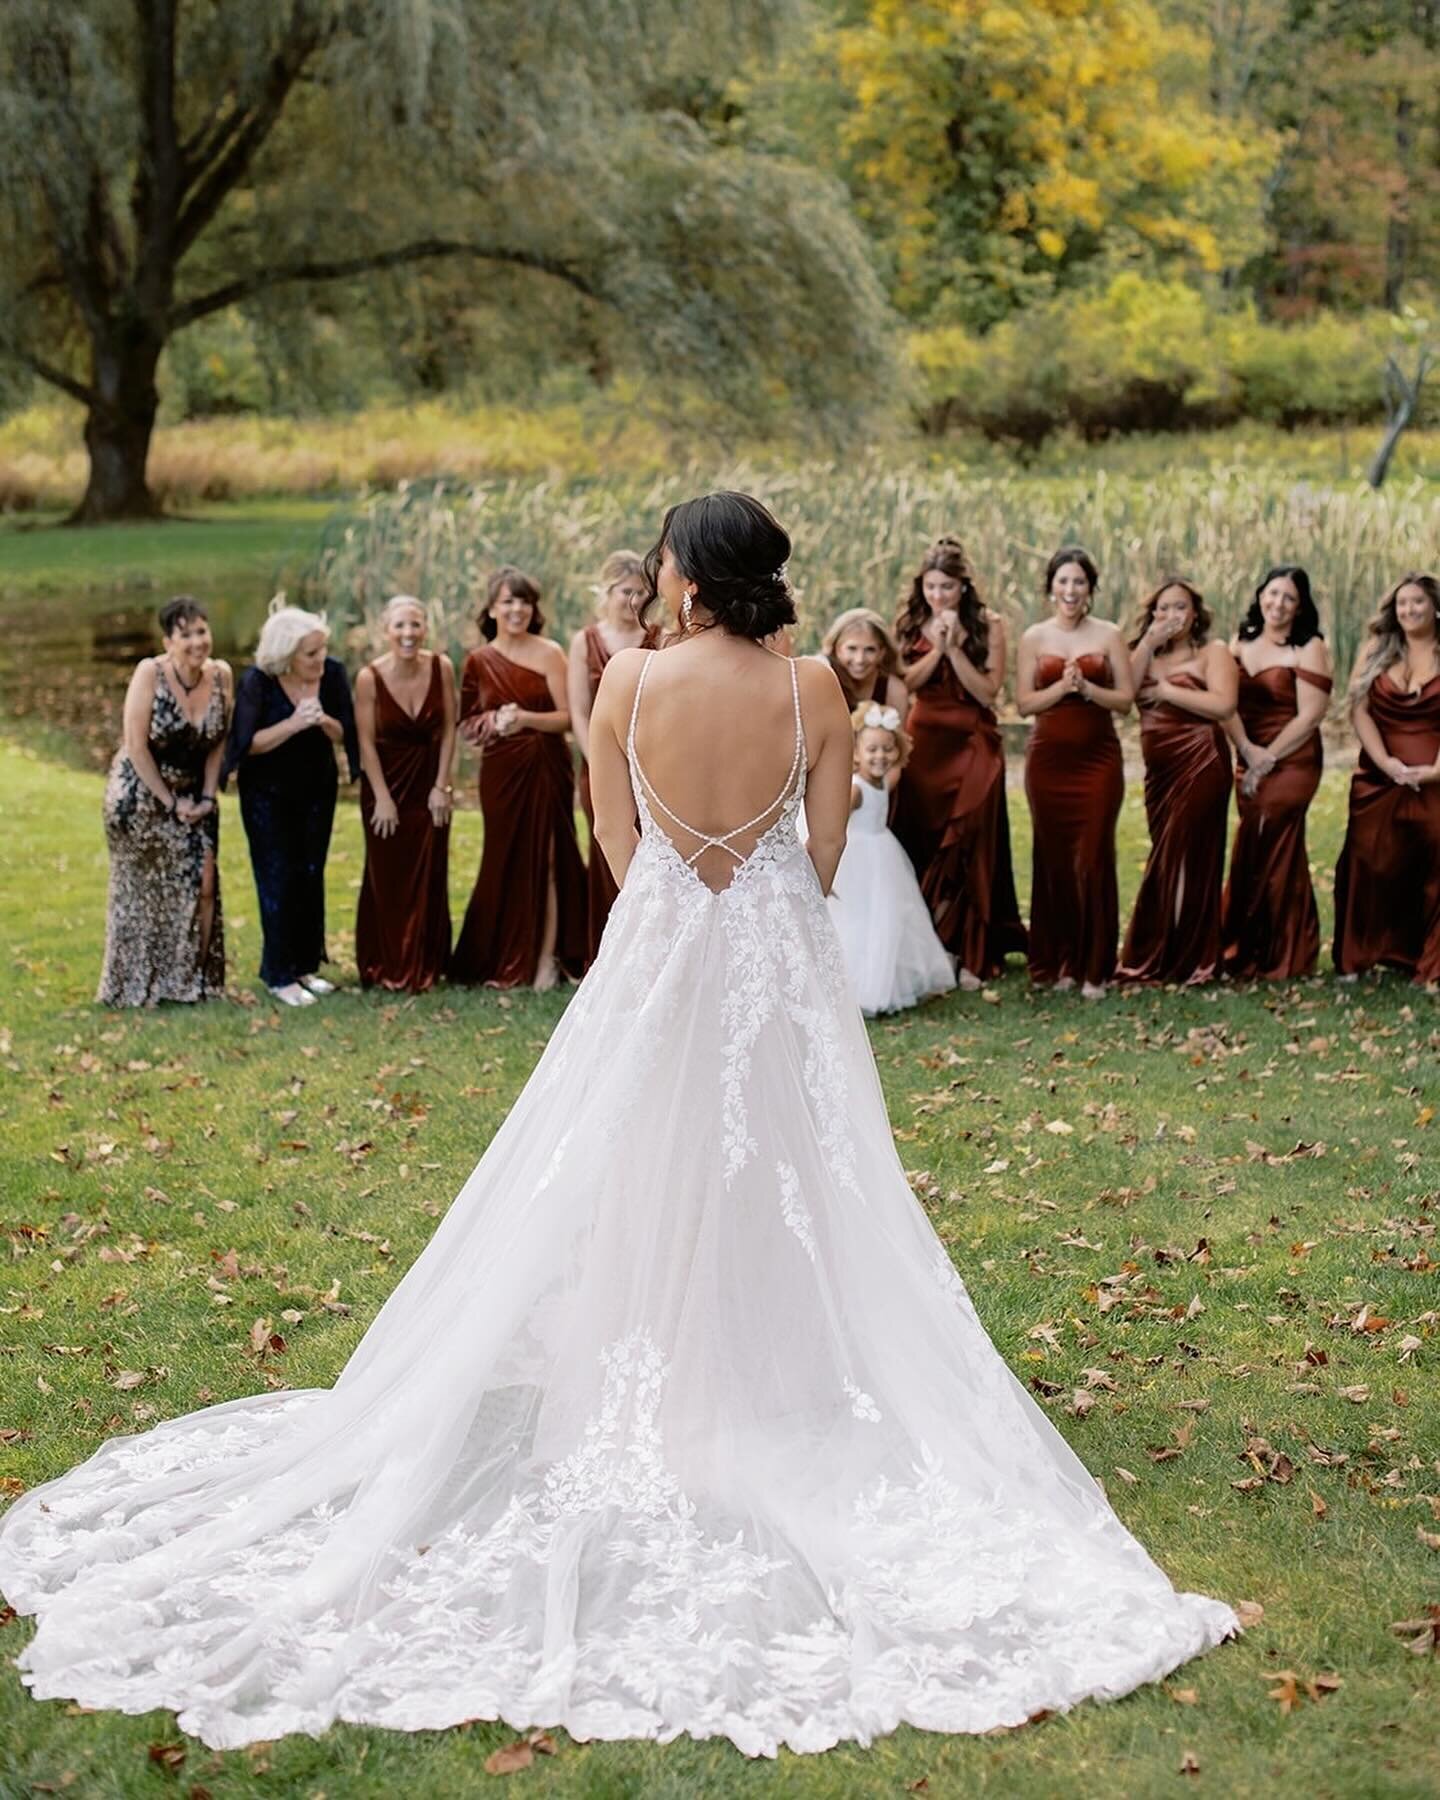 Brianna and her girls surrounded by hues of fall- a thumbs up for this bridesmaids reveal!